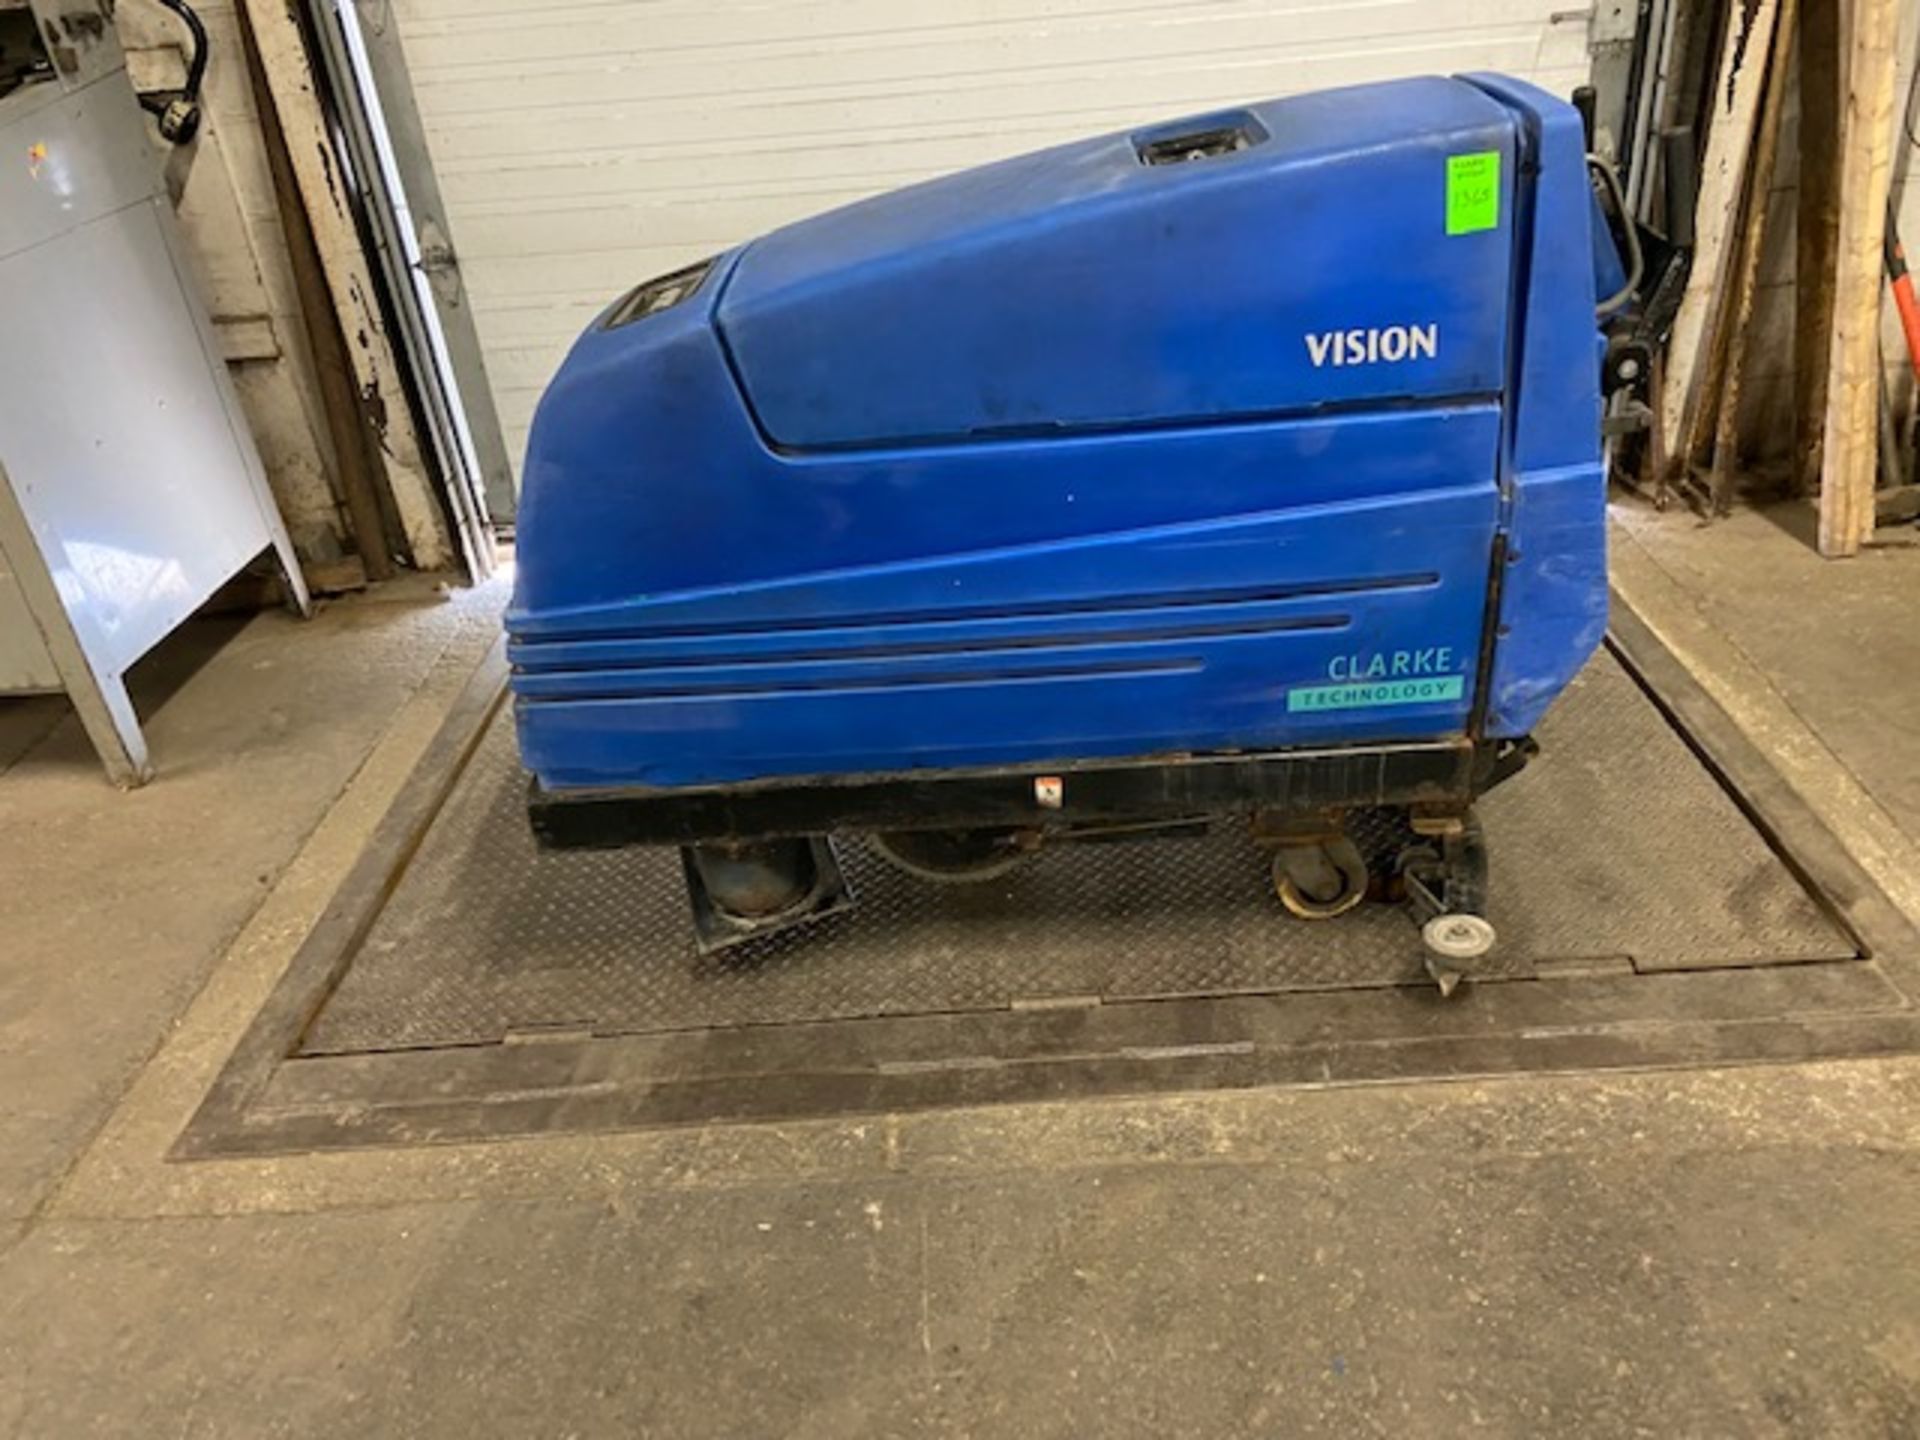 Clark Walk Behind Electric Sweeper Scrubber Unit - Clark vision - missing front brush unit